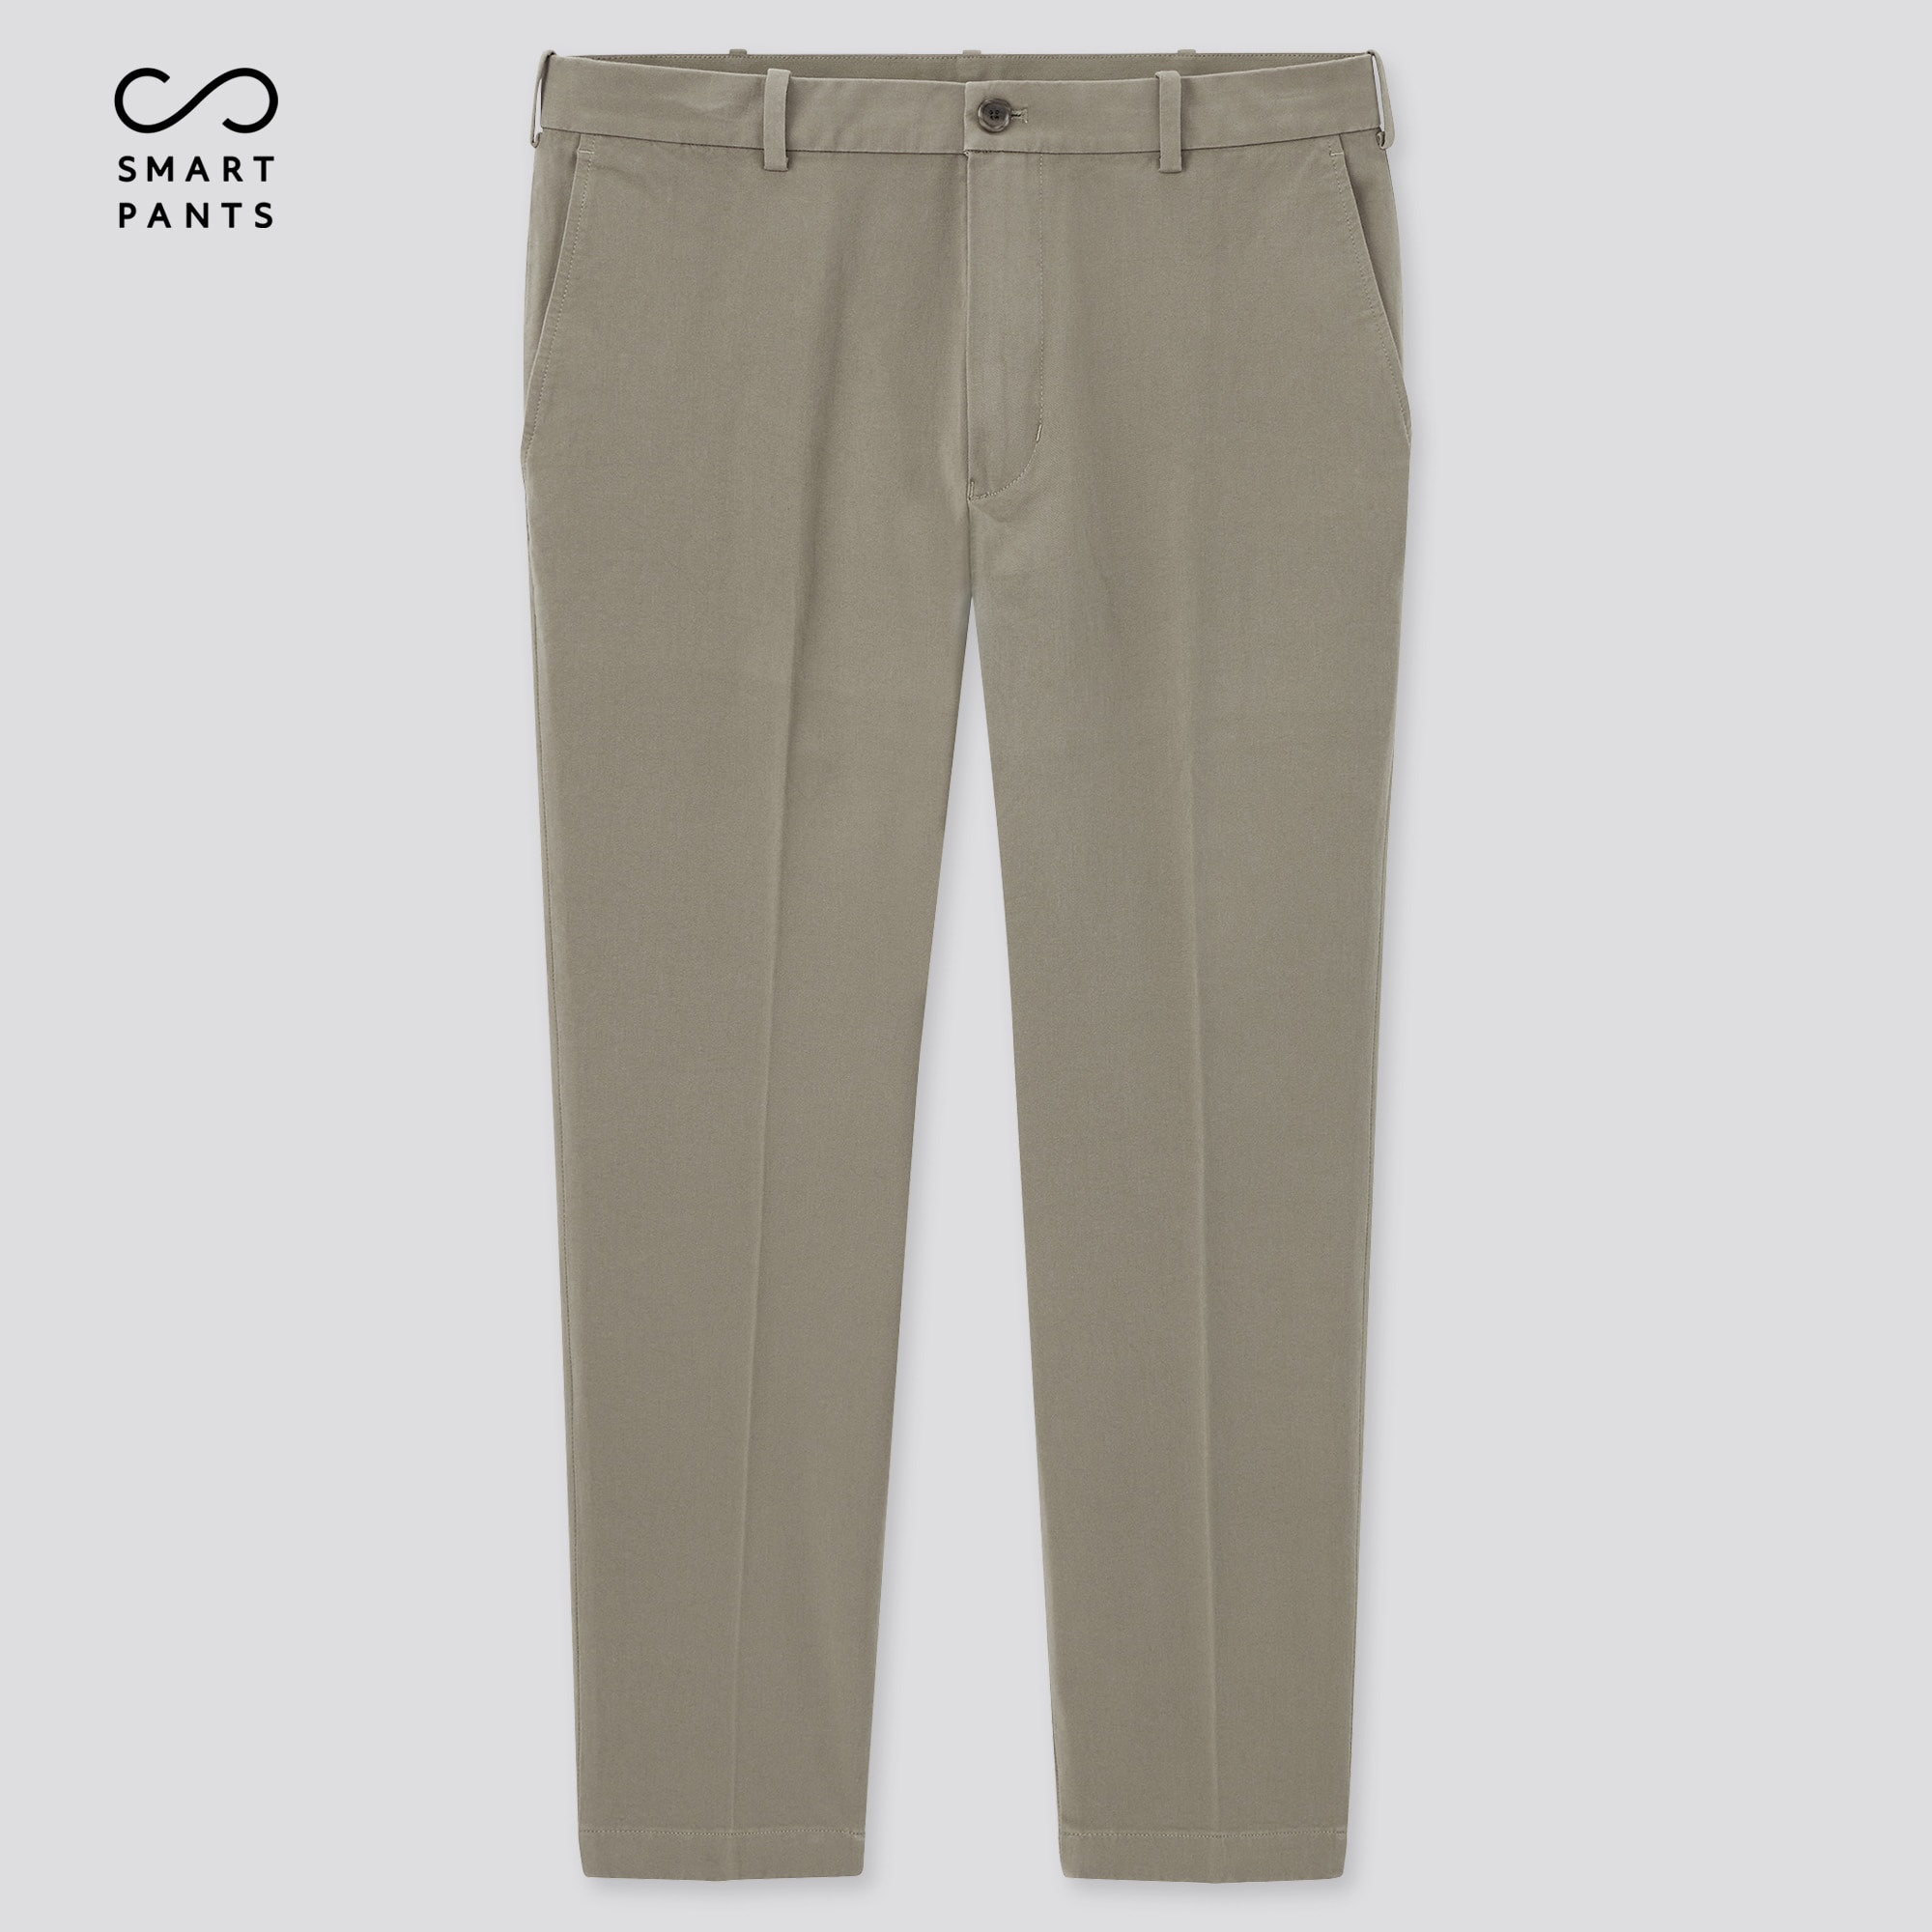 UNIQLO Smart Ankle Pants (2-Way Stretch Cotton, Tall) | StyleHint